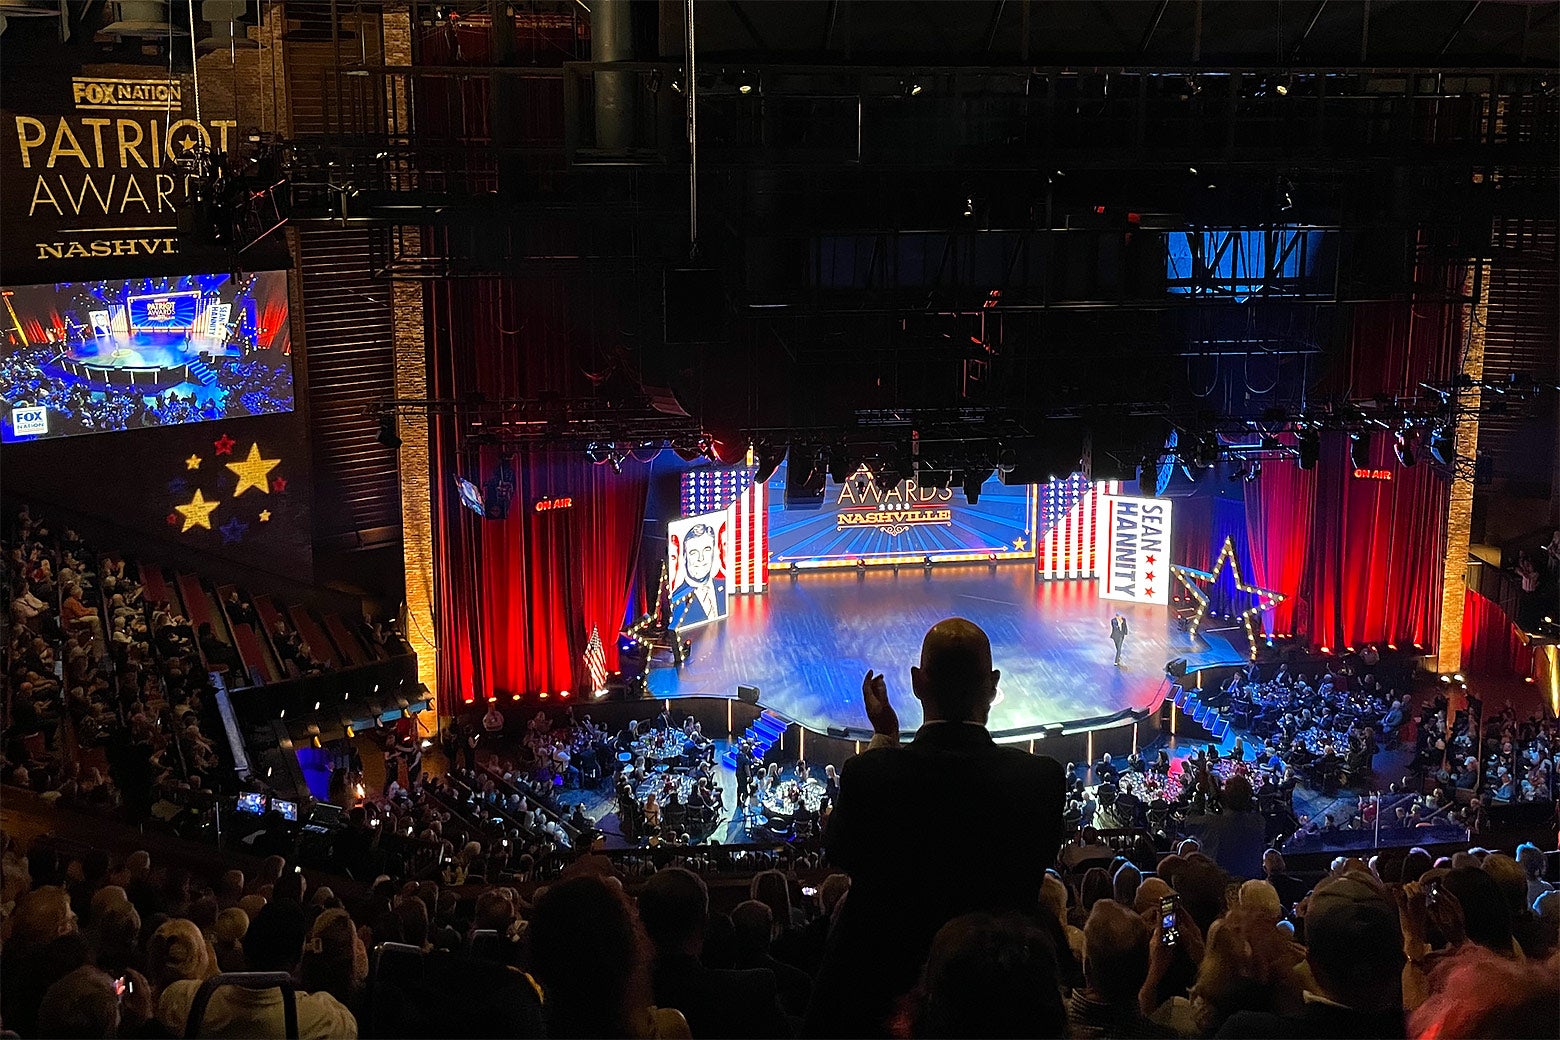 A man, in silhouette, stands to clap for Sean Hannity who is walking across a brightly lit stage at the Grand Ole Opry.